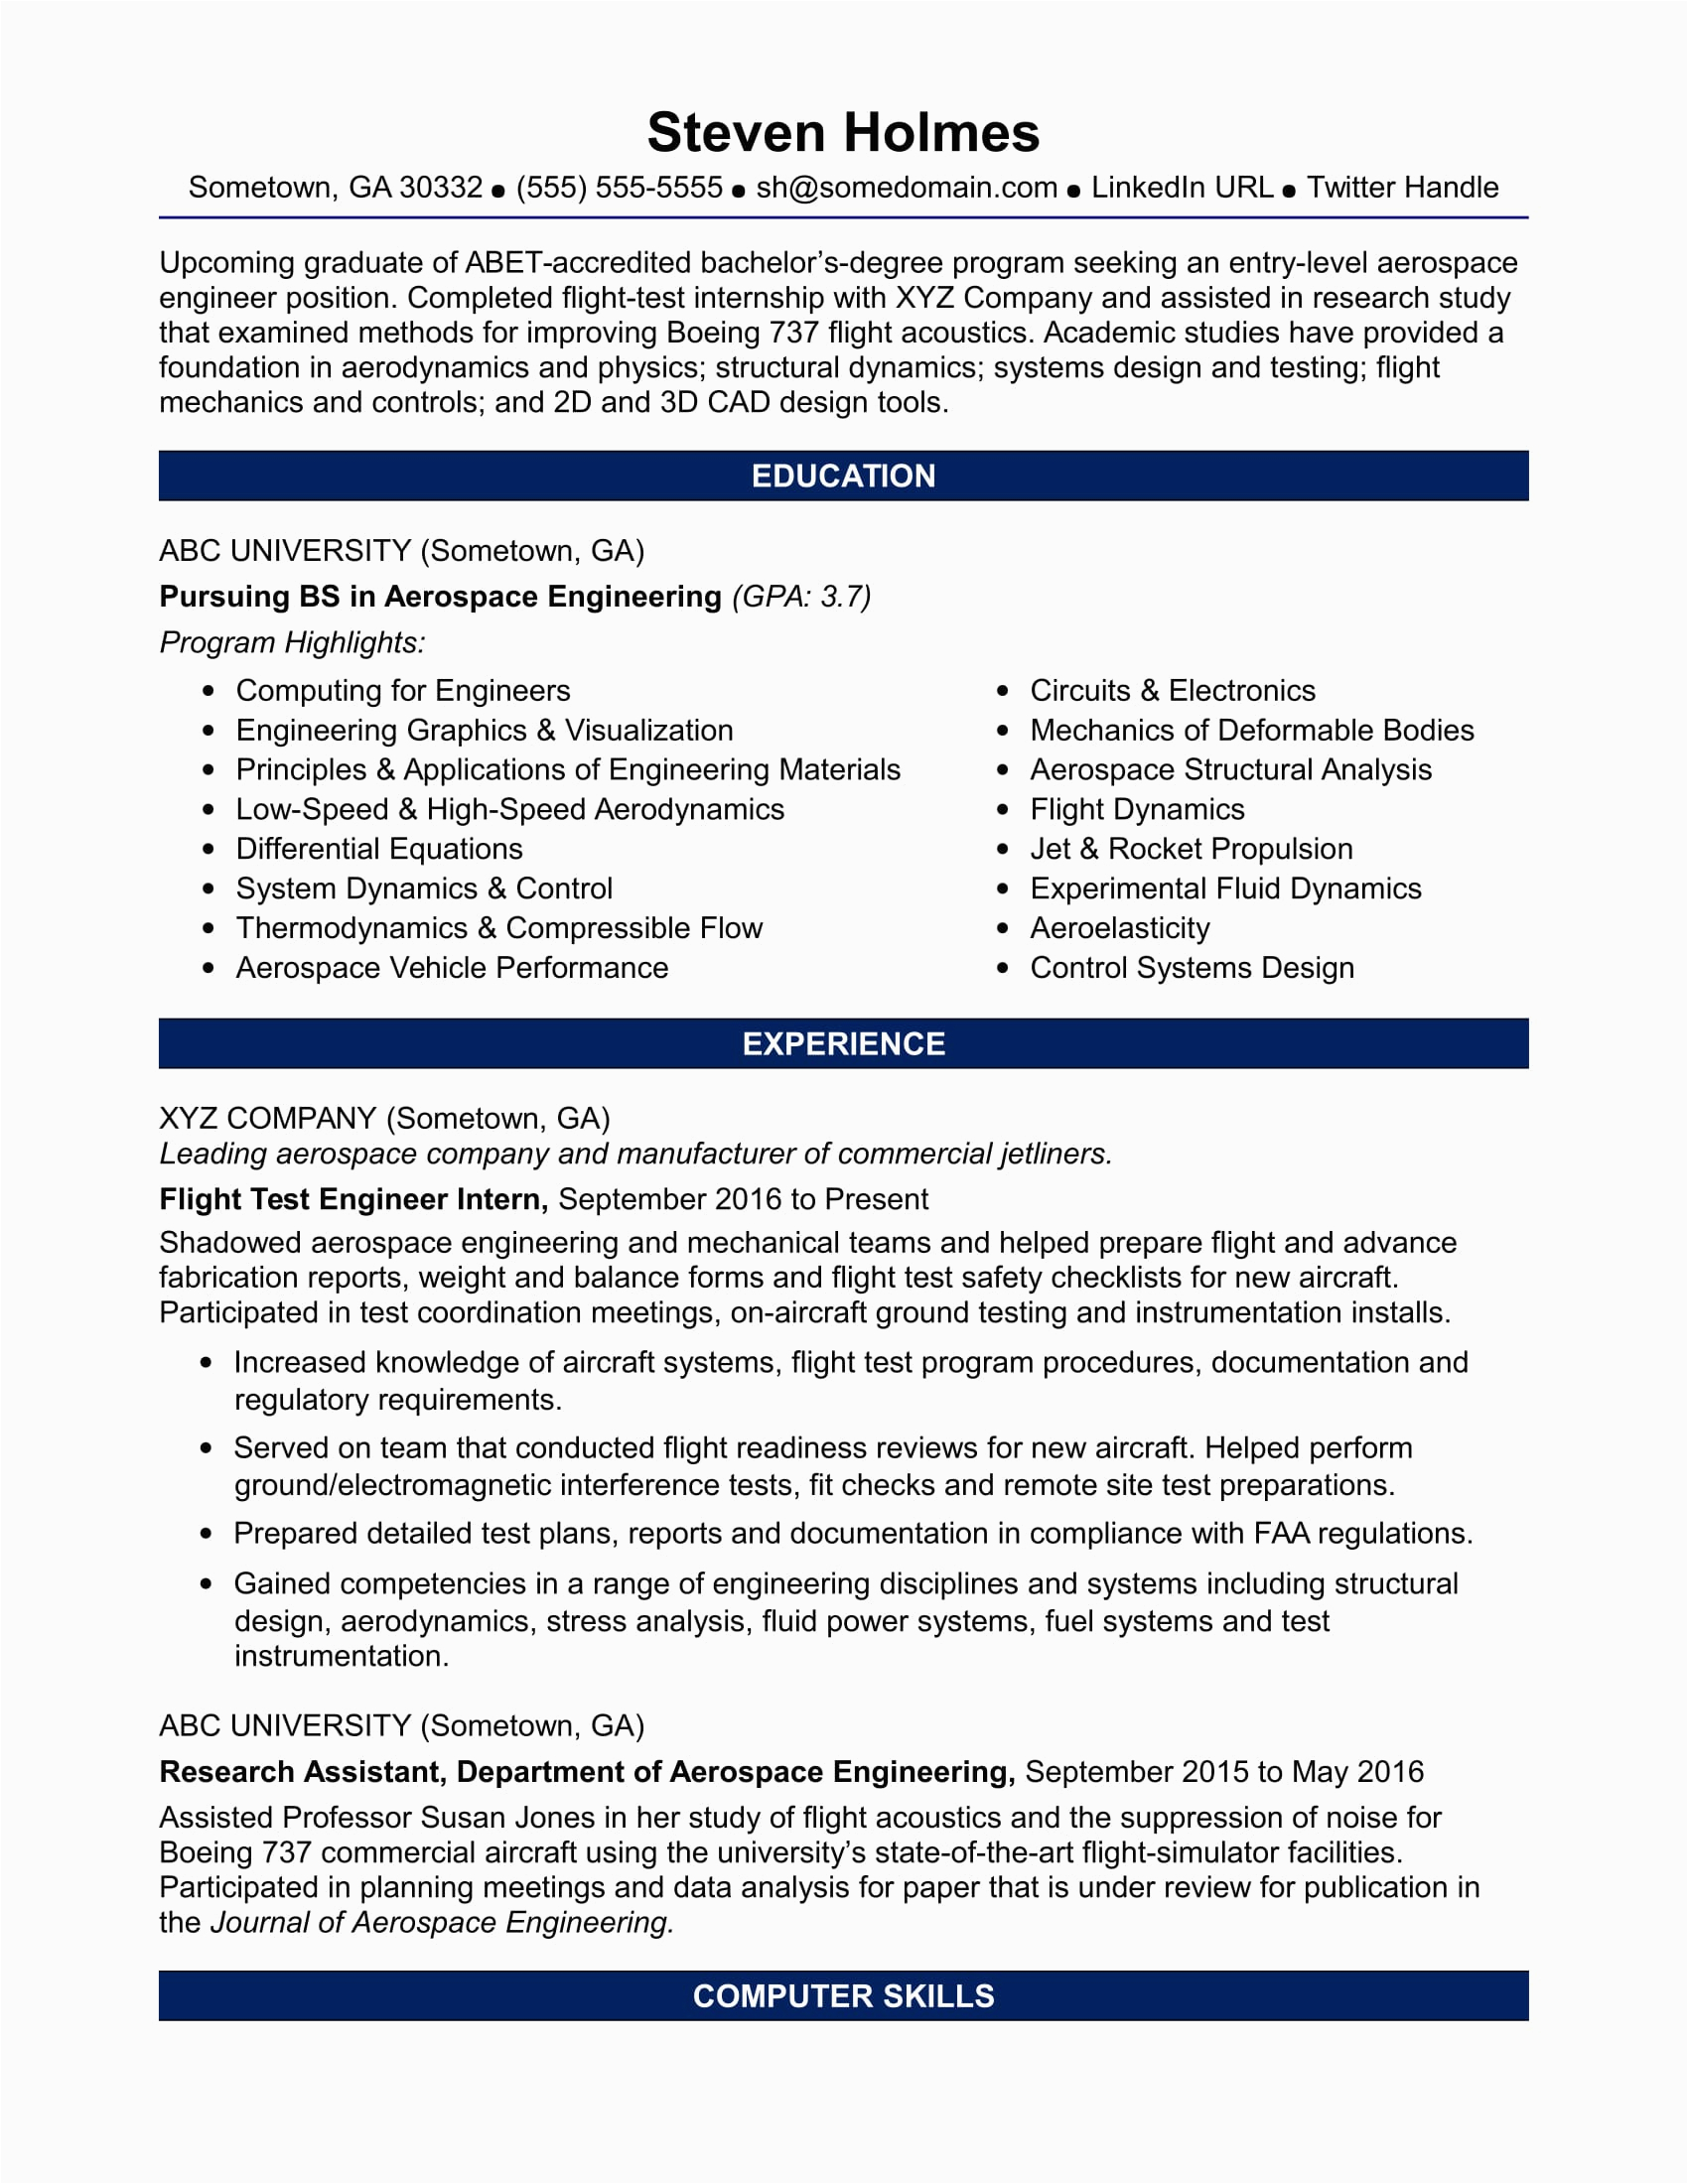 Sample Of Entry Level Engineering Resume Sample Resume for An Entry Level Aerospace Engineer